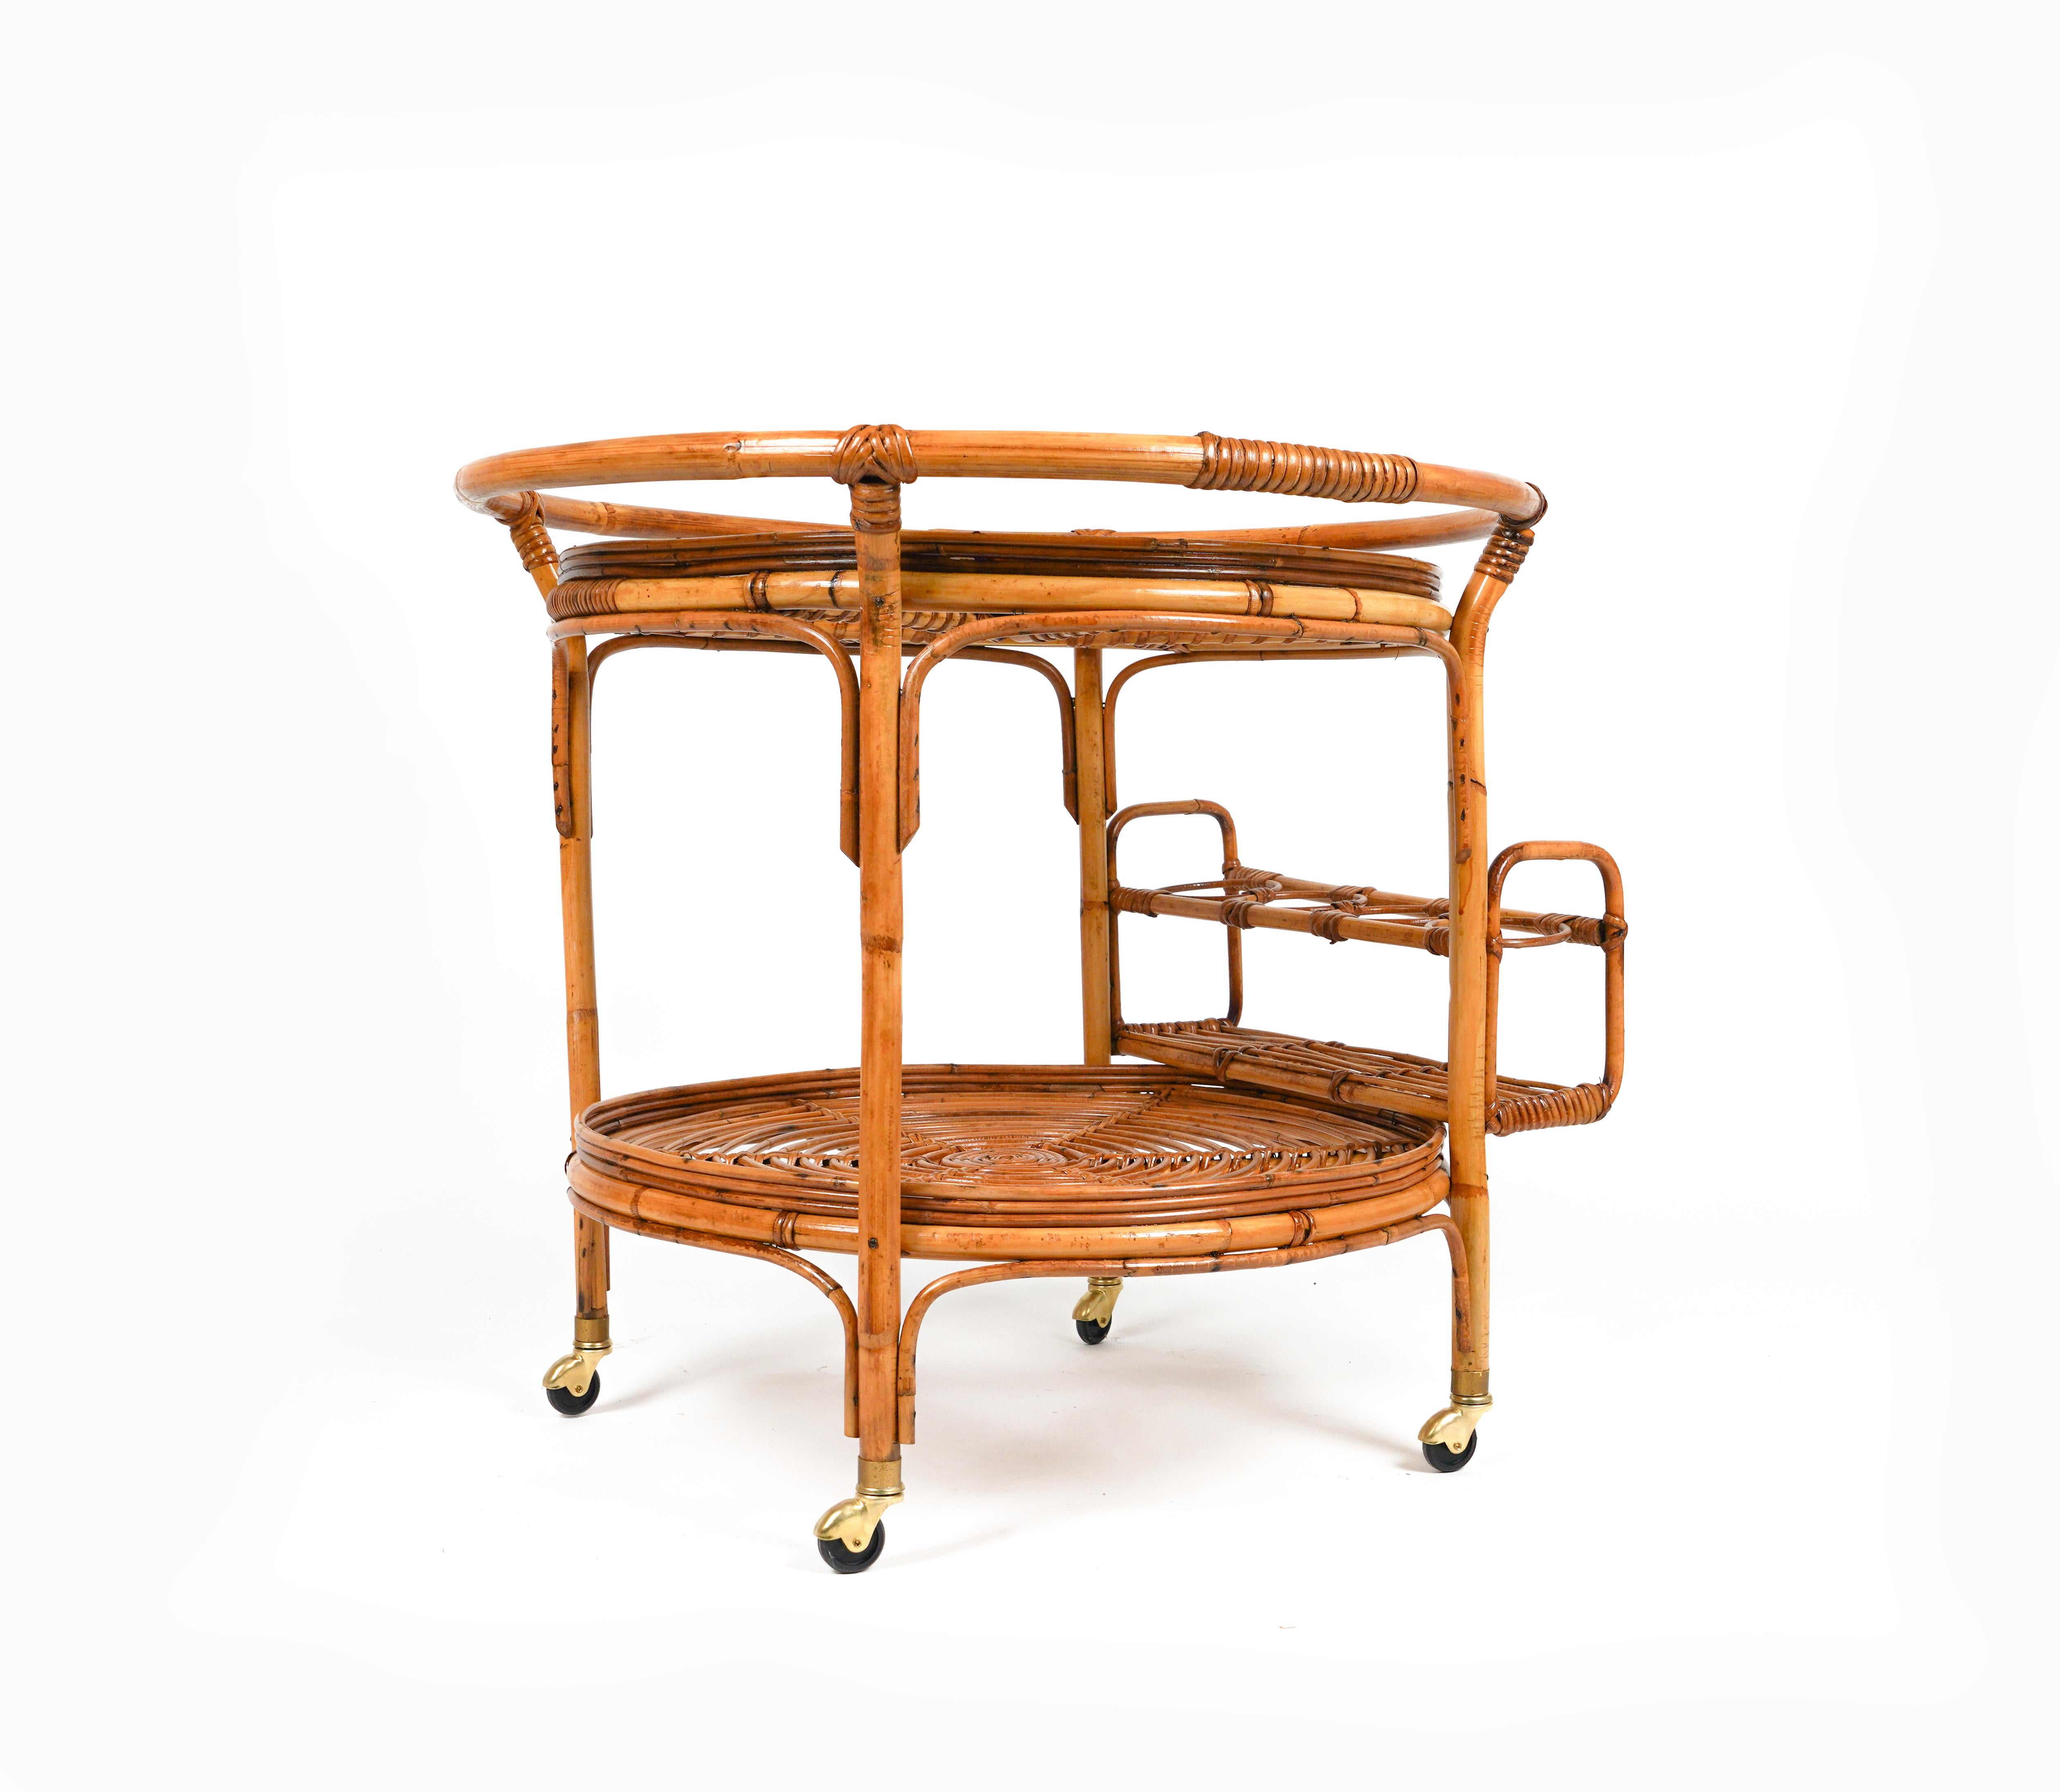 Midcentury Rattan and Bamboo Round Serving Bar Cart Trolley, Italy 1960s In Good Condition For Sale In Rome, IT